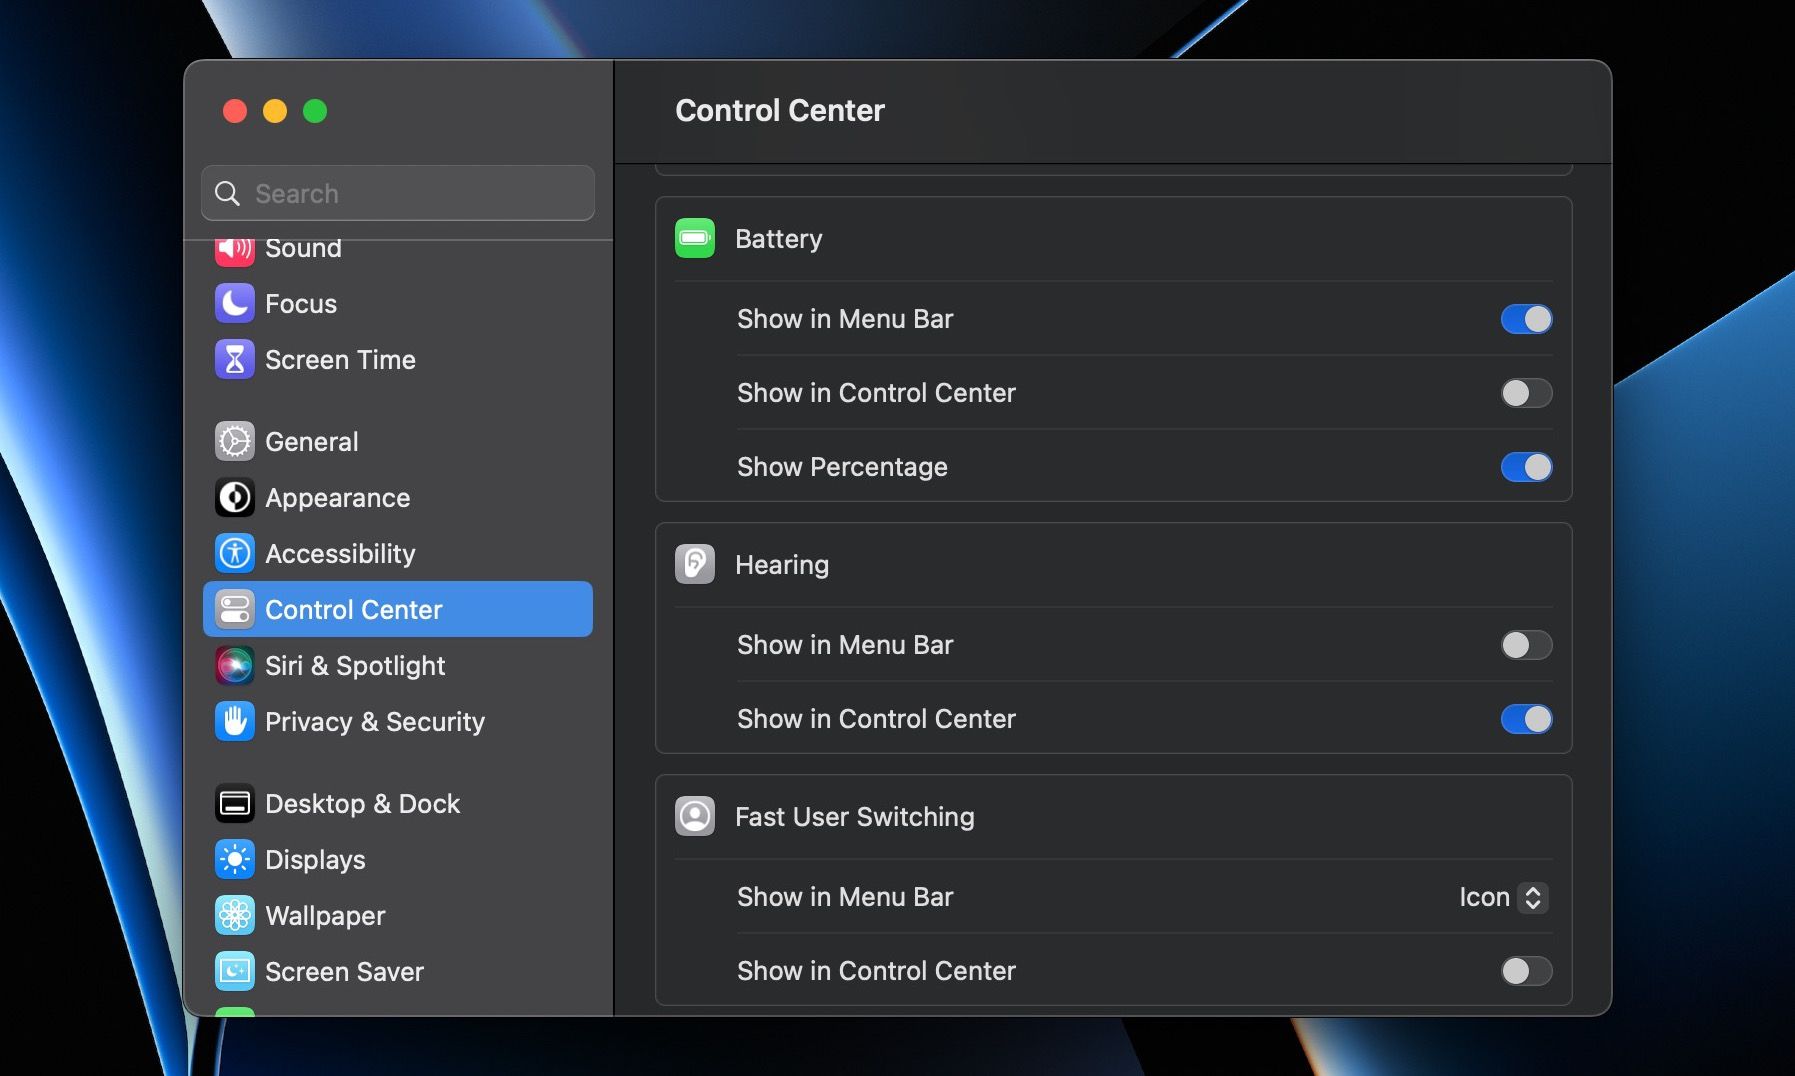 Enable Show in Control Center for Hearing in Control Center Settings on Mac